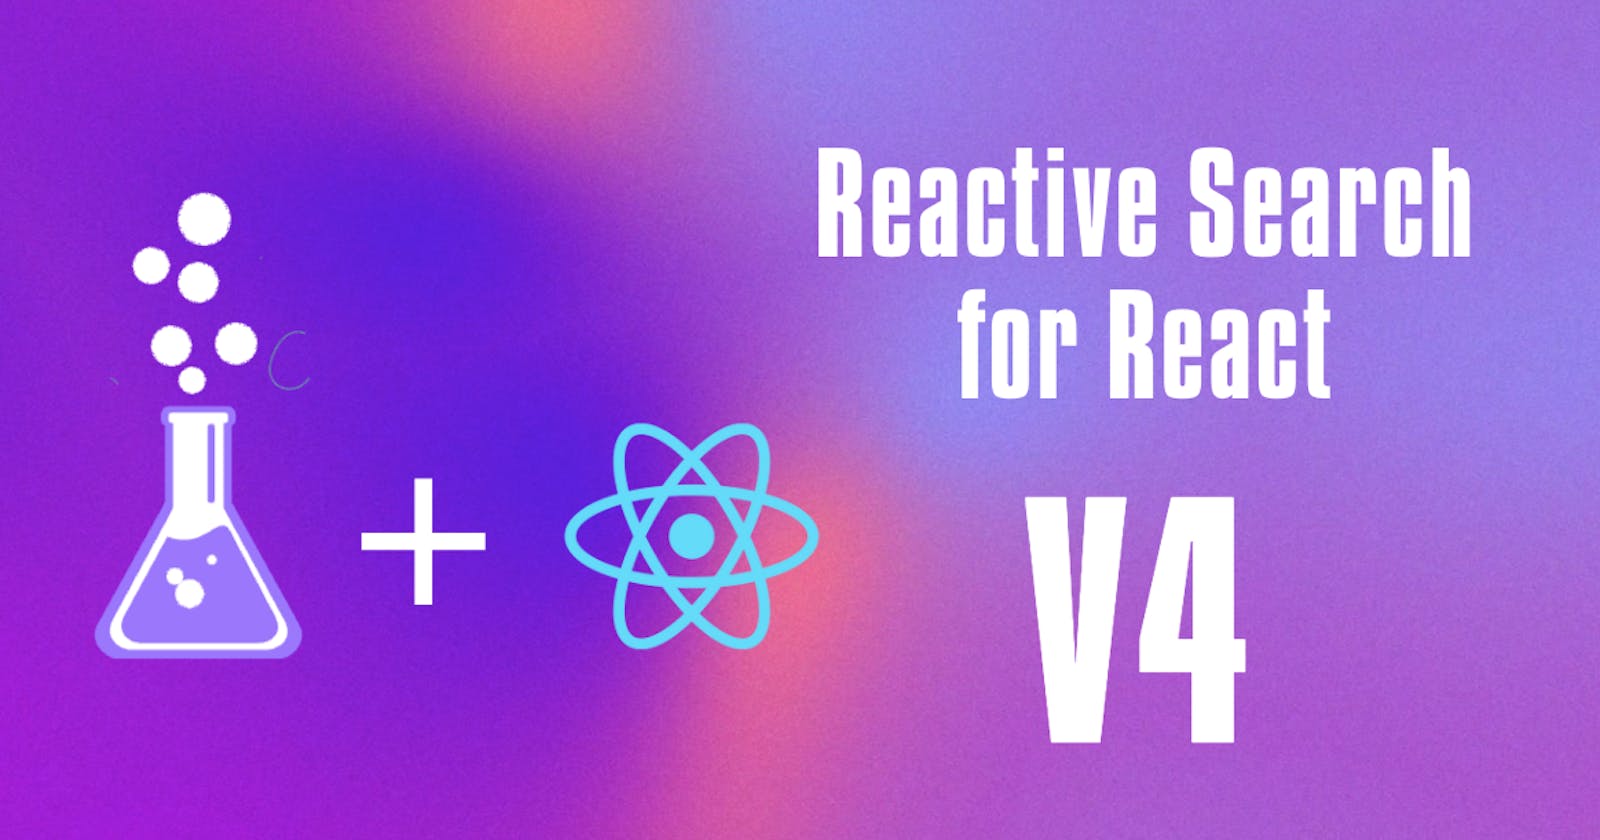 ReactiveSearch for React 4.0 - UI components for building intelligent UIs